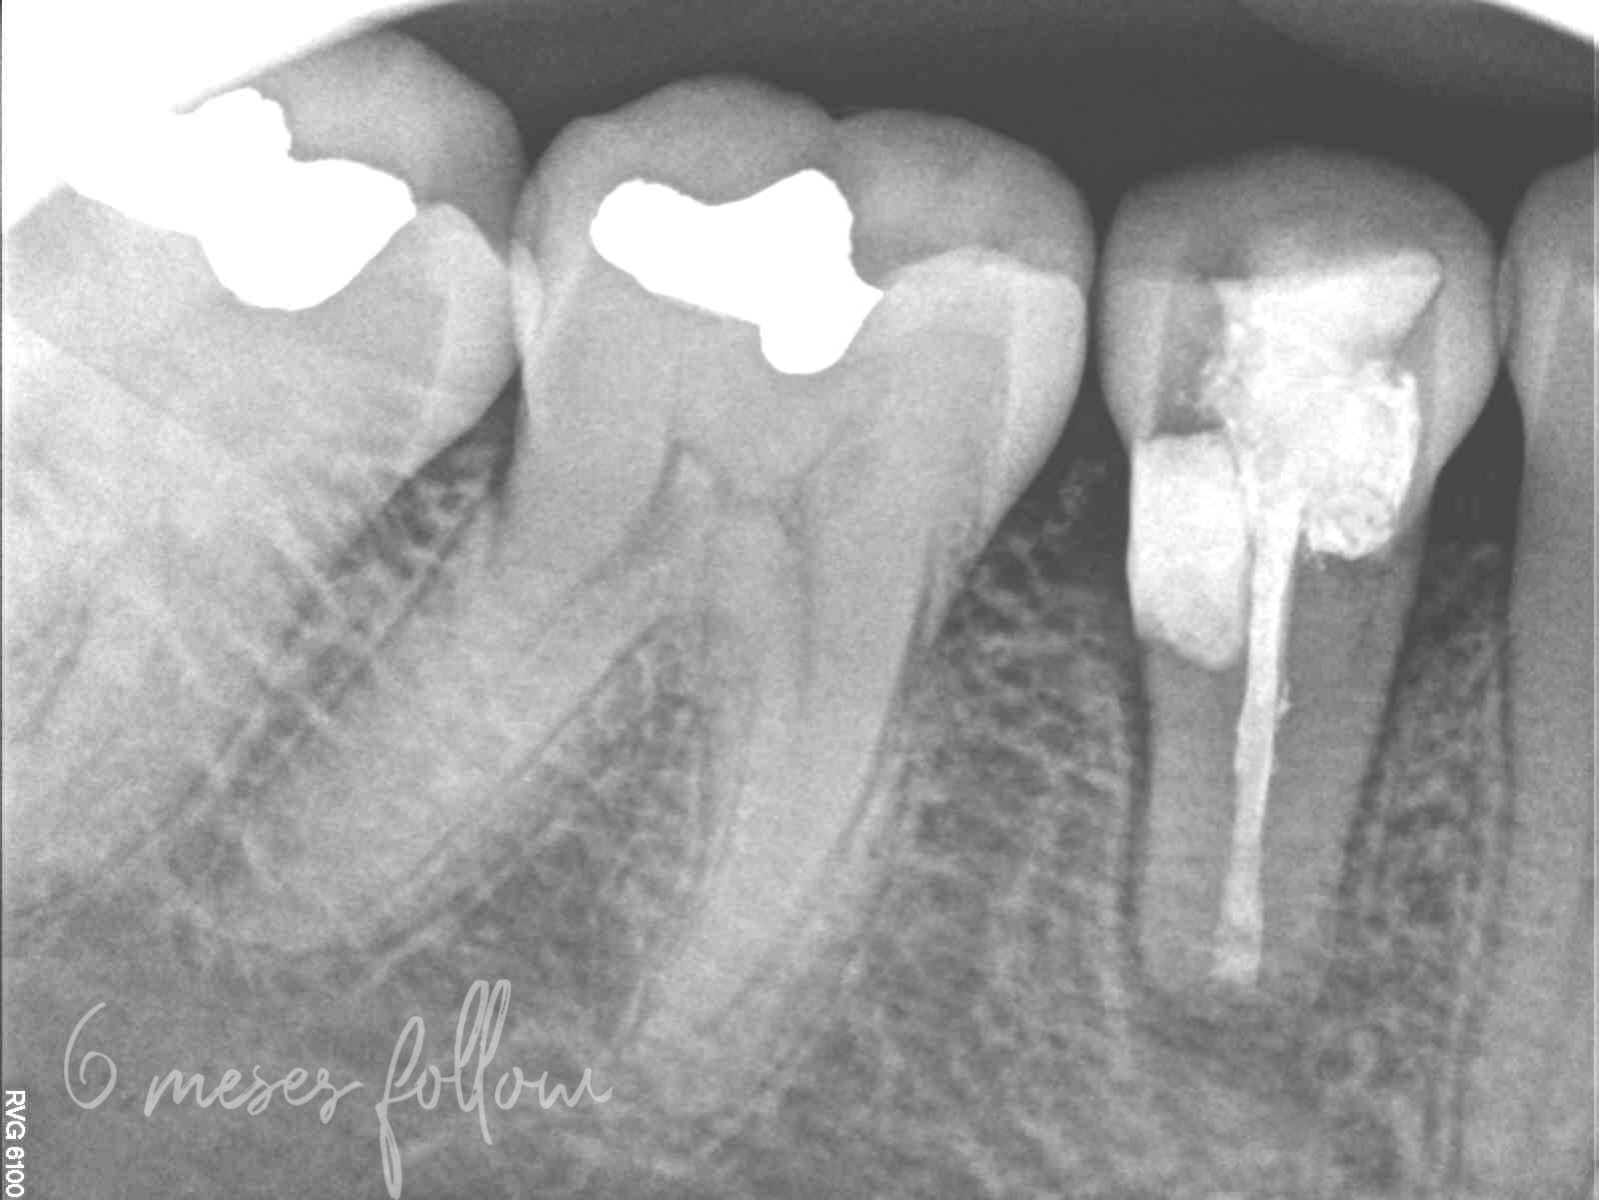 Fig. 7: The periapical radiograph at six months showed almost complete healing and no signs of apical pathosis.